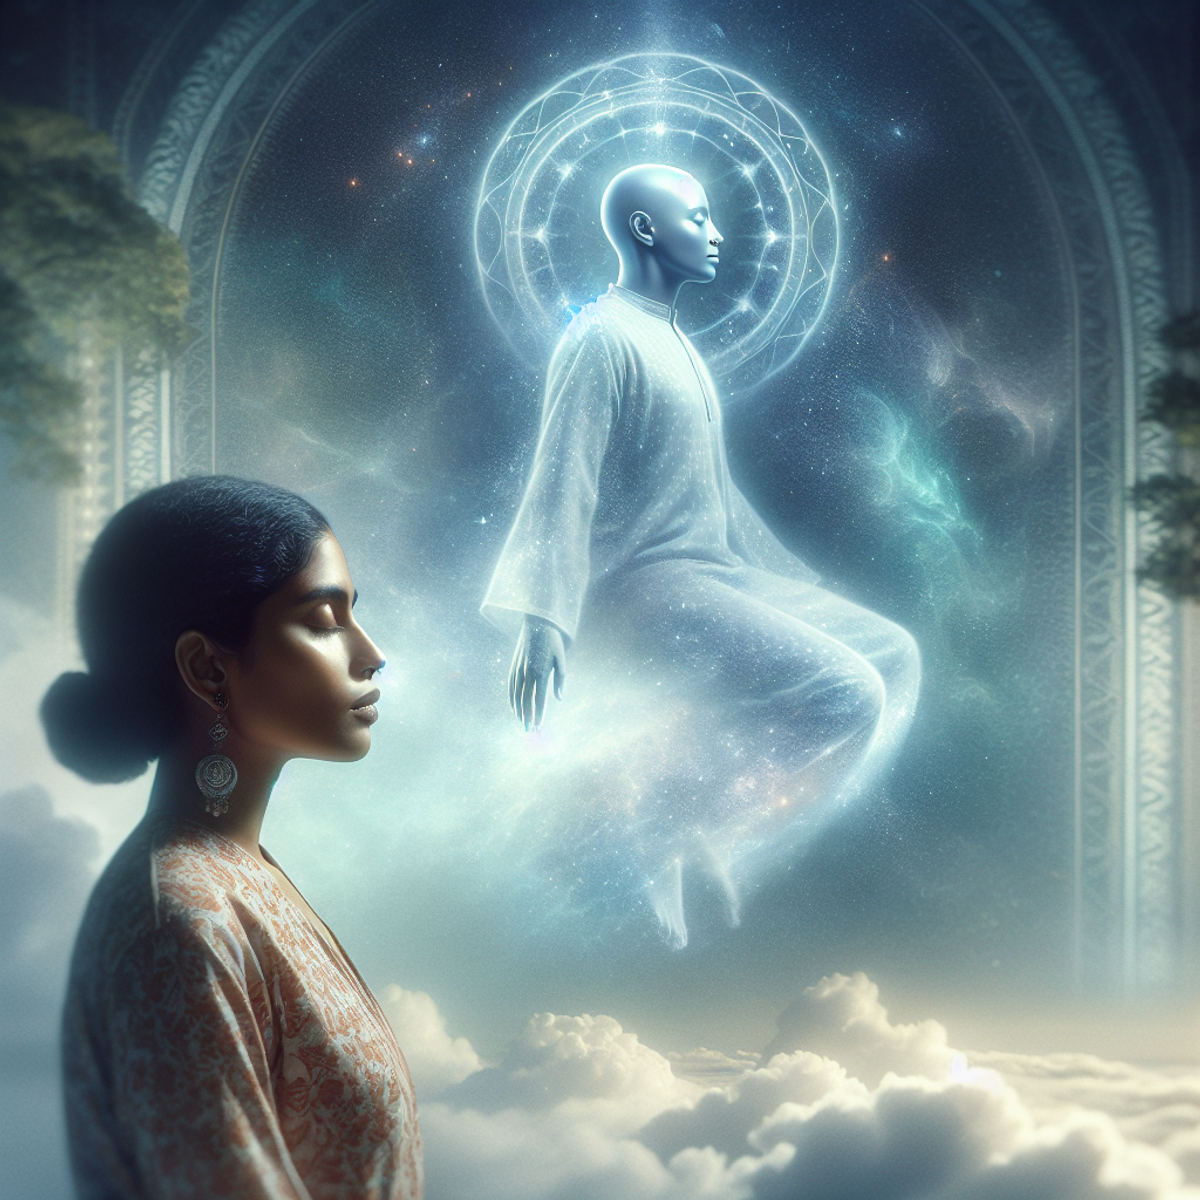 A woman meditating and levitating with a silvery astral form floating above her.